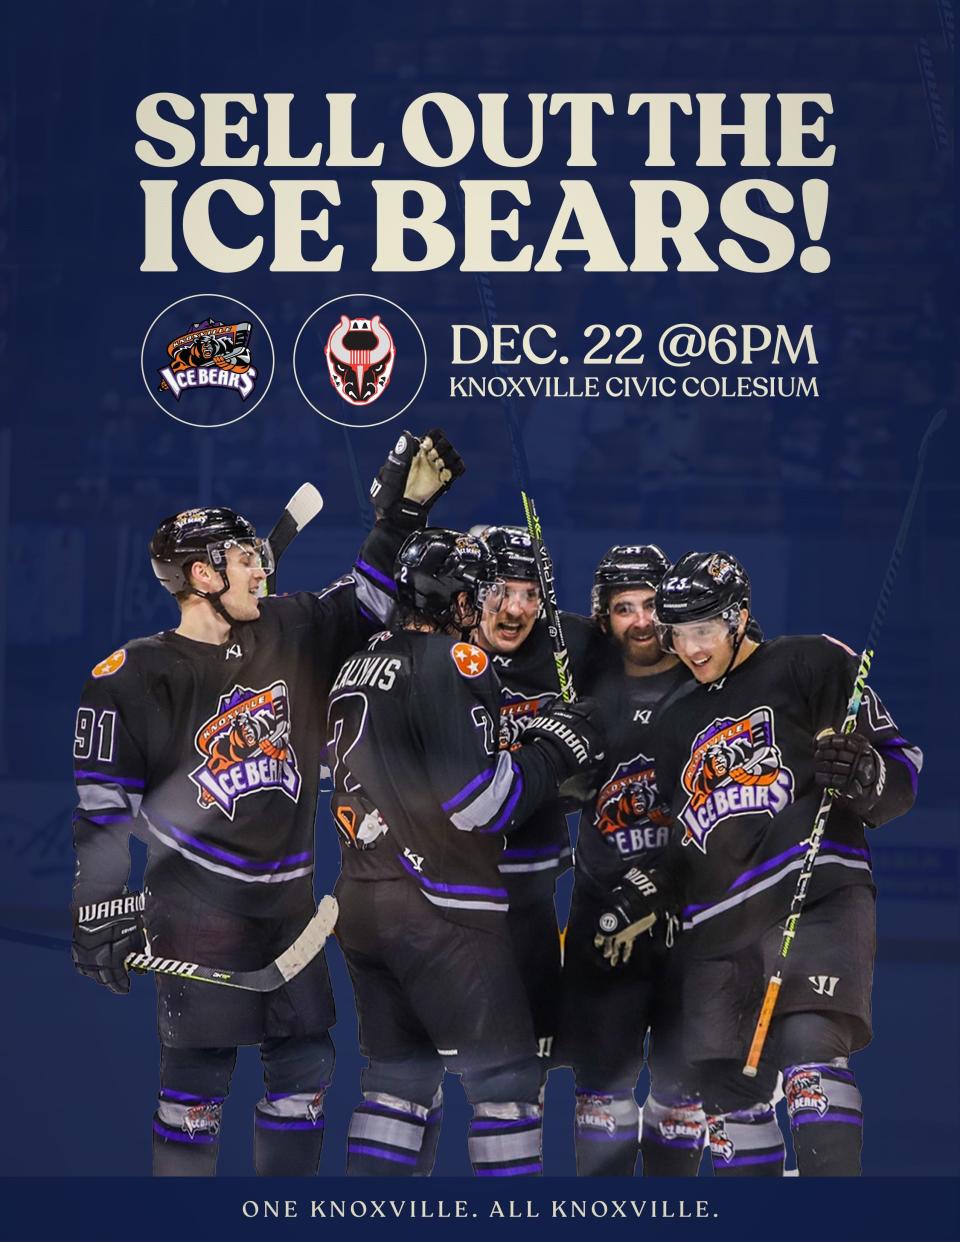 In a show of sportsmanship, One Knoxville SC and the Smokies are rallying their fans to support the Ice Bears at their Dec. 22 game.